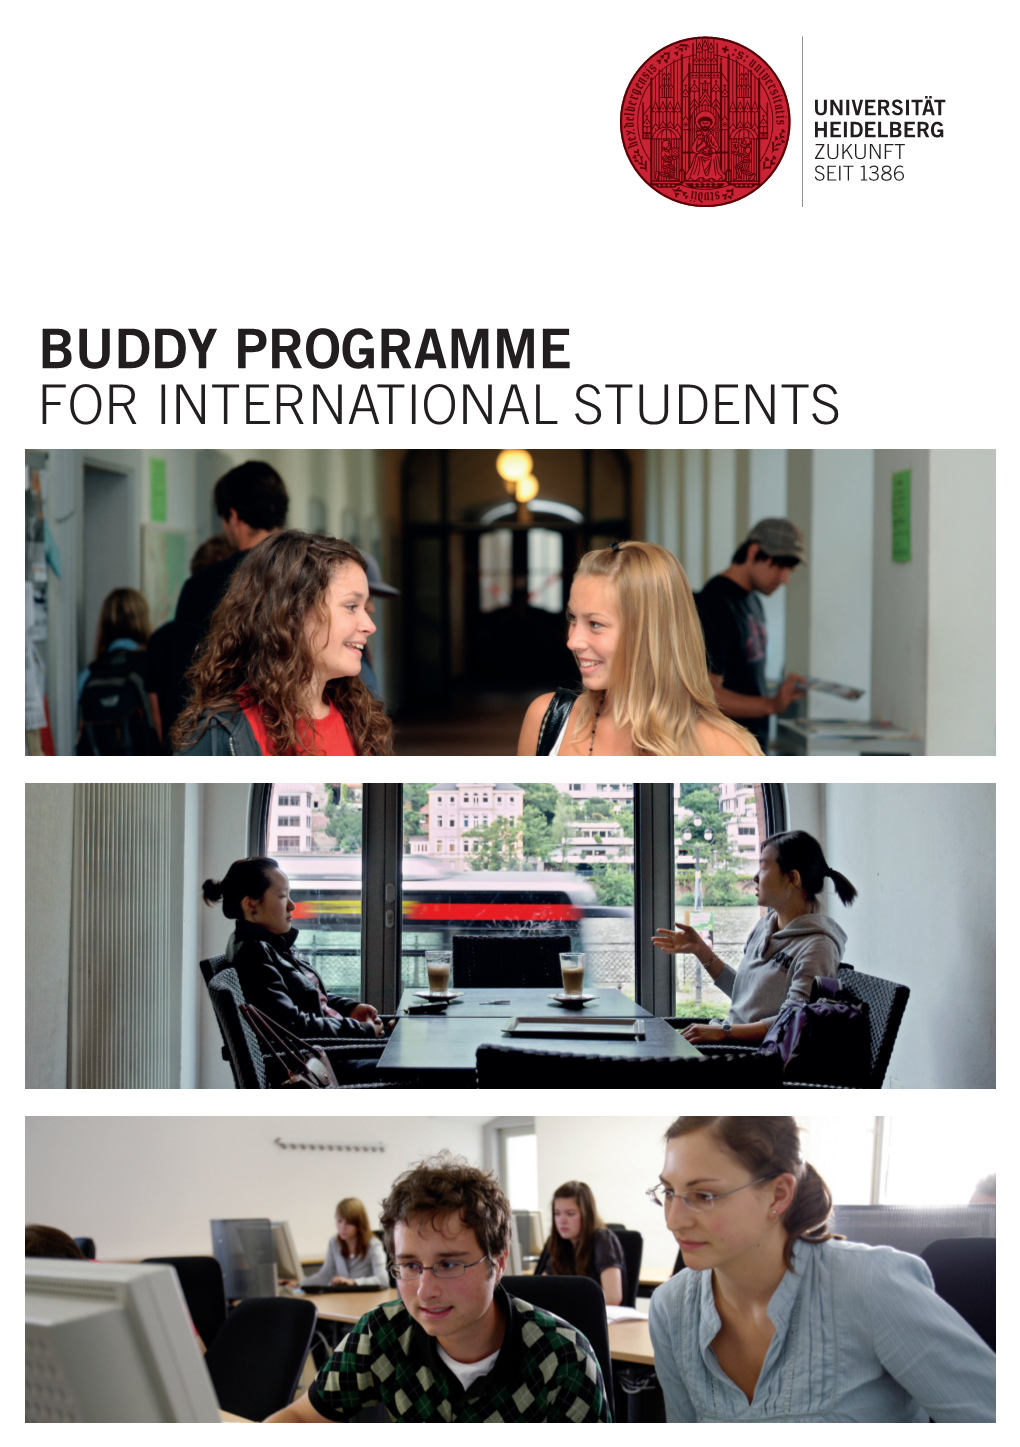 Buddy Programme for International Students List of Contents